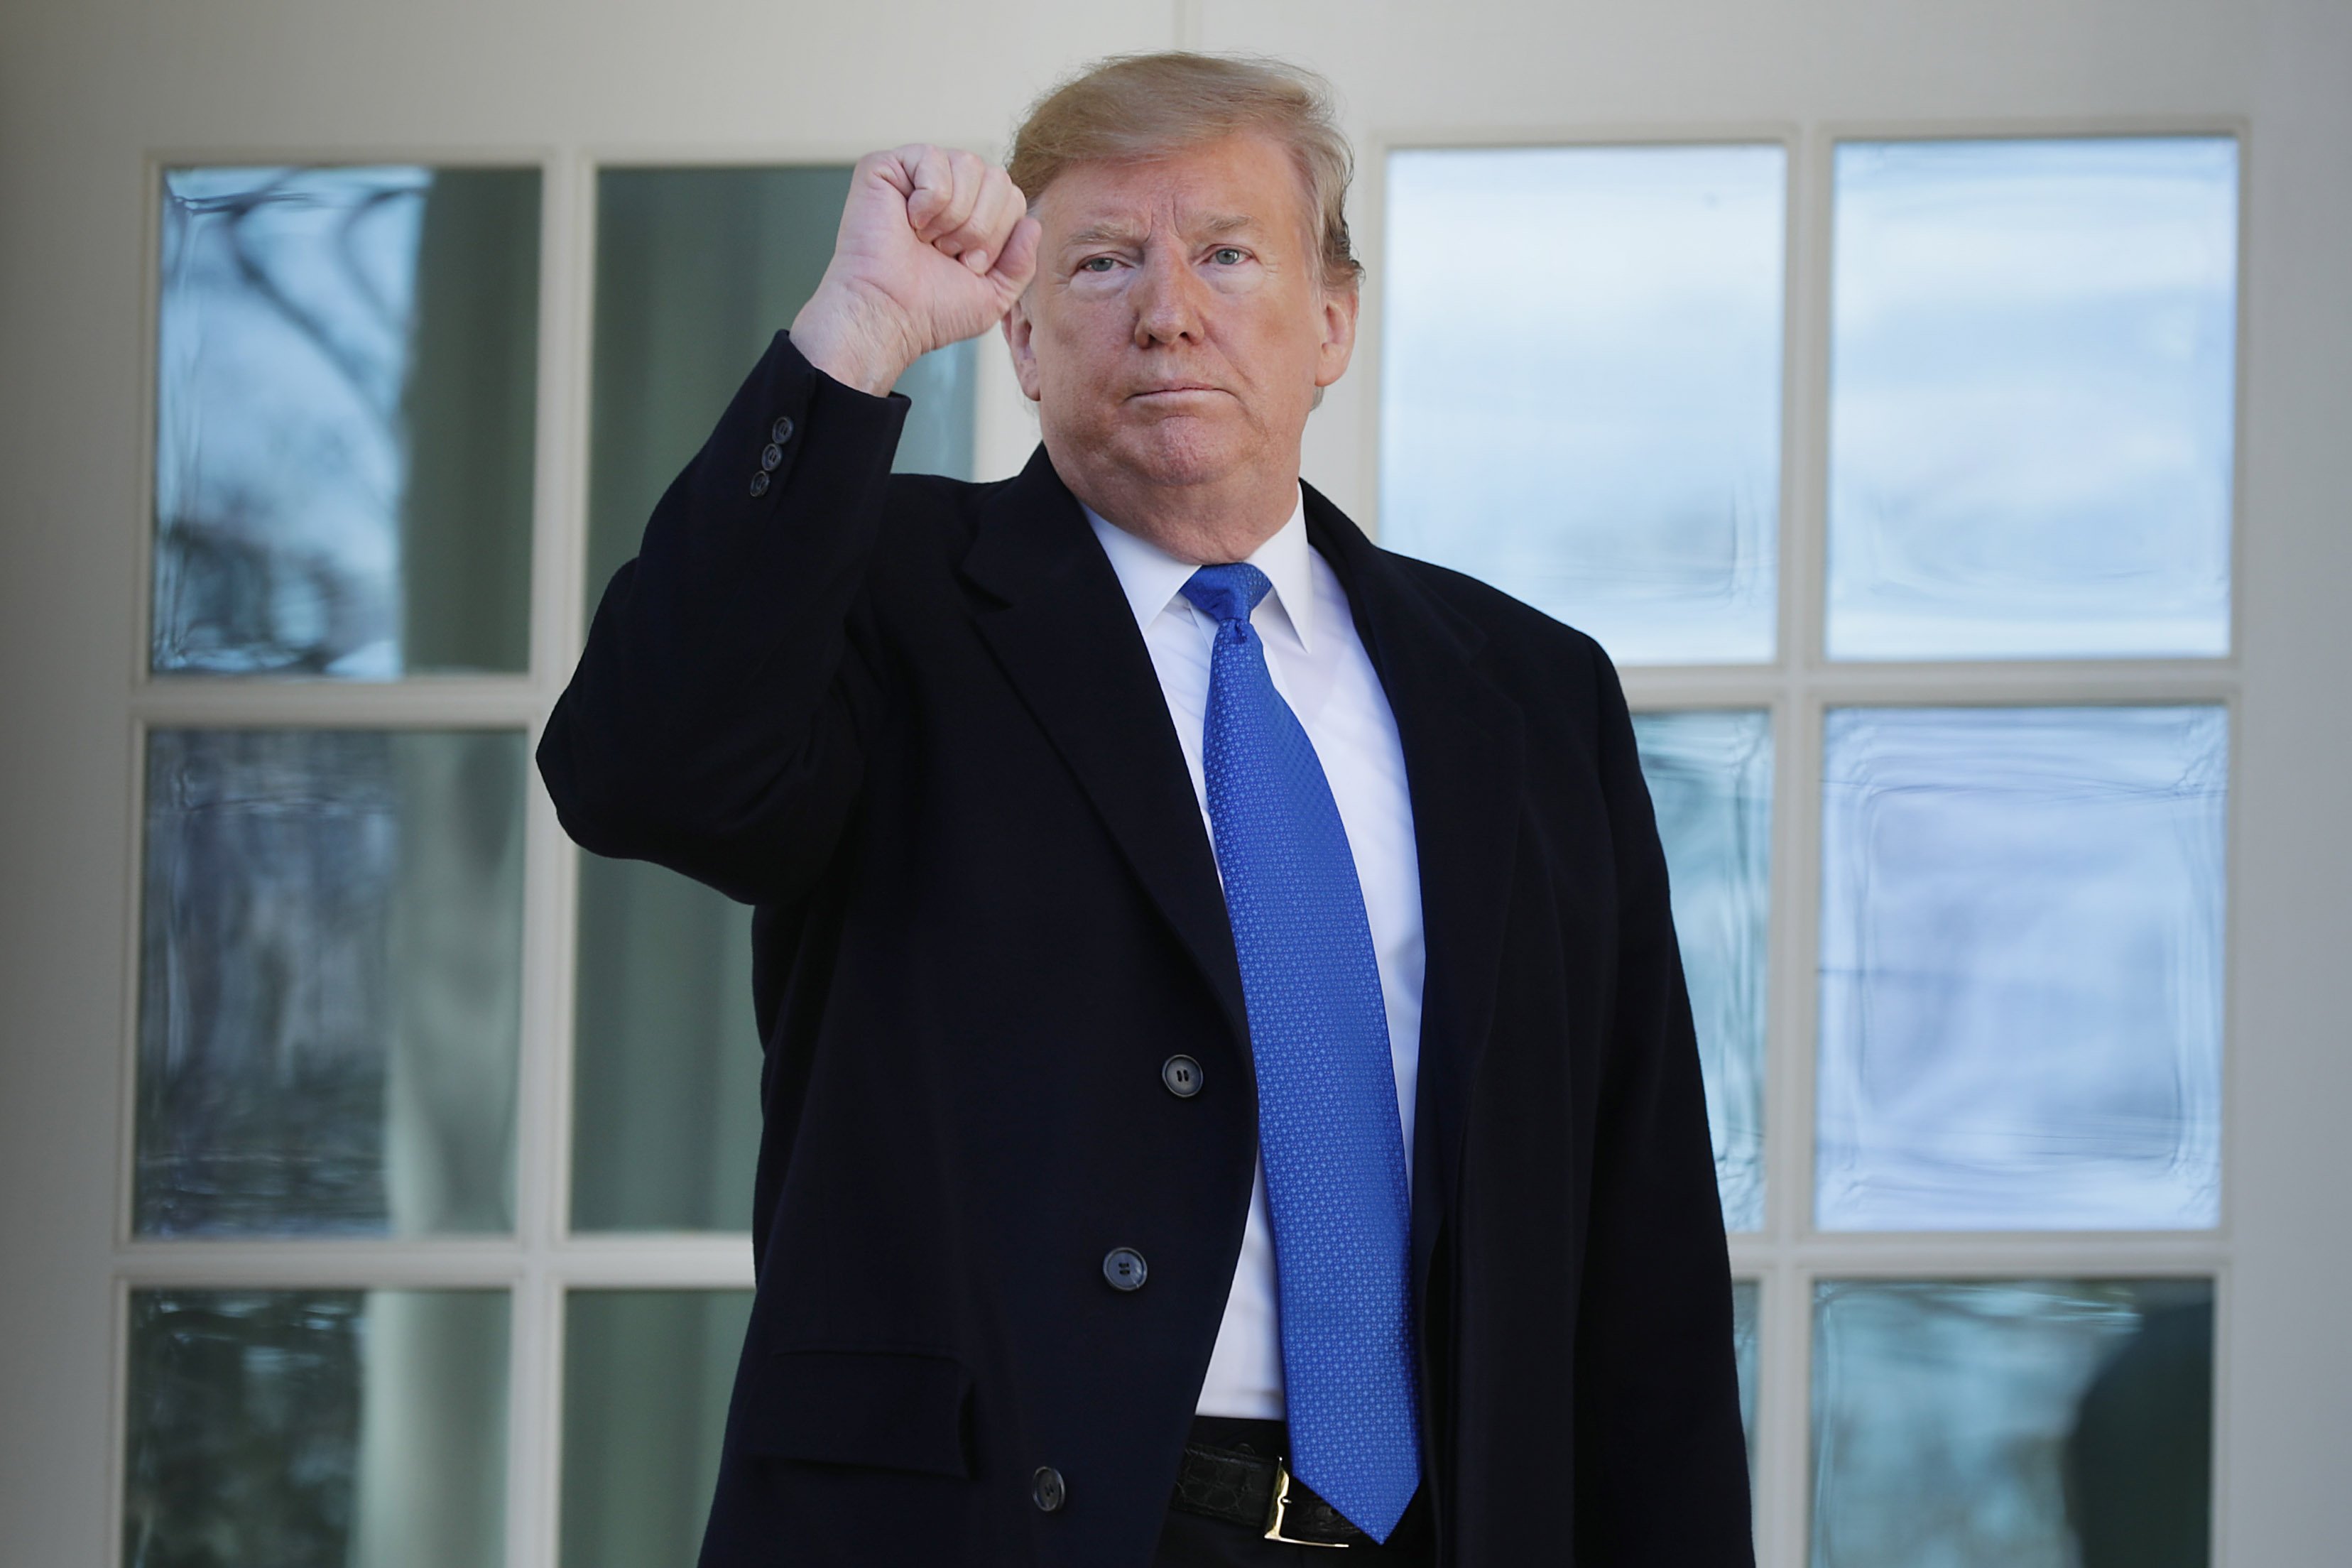 Donald Trump prior to his National Emergency announcement at the White House | Photo: Getty Images